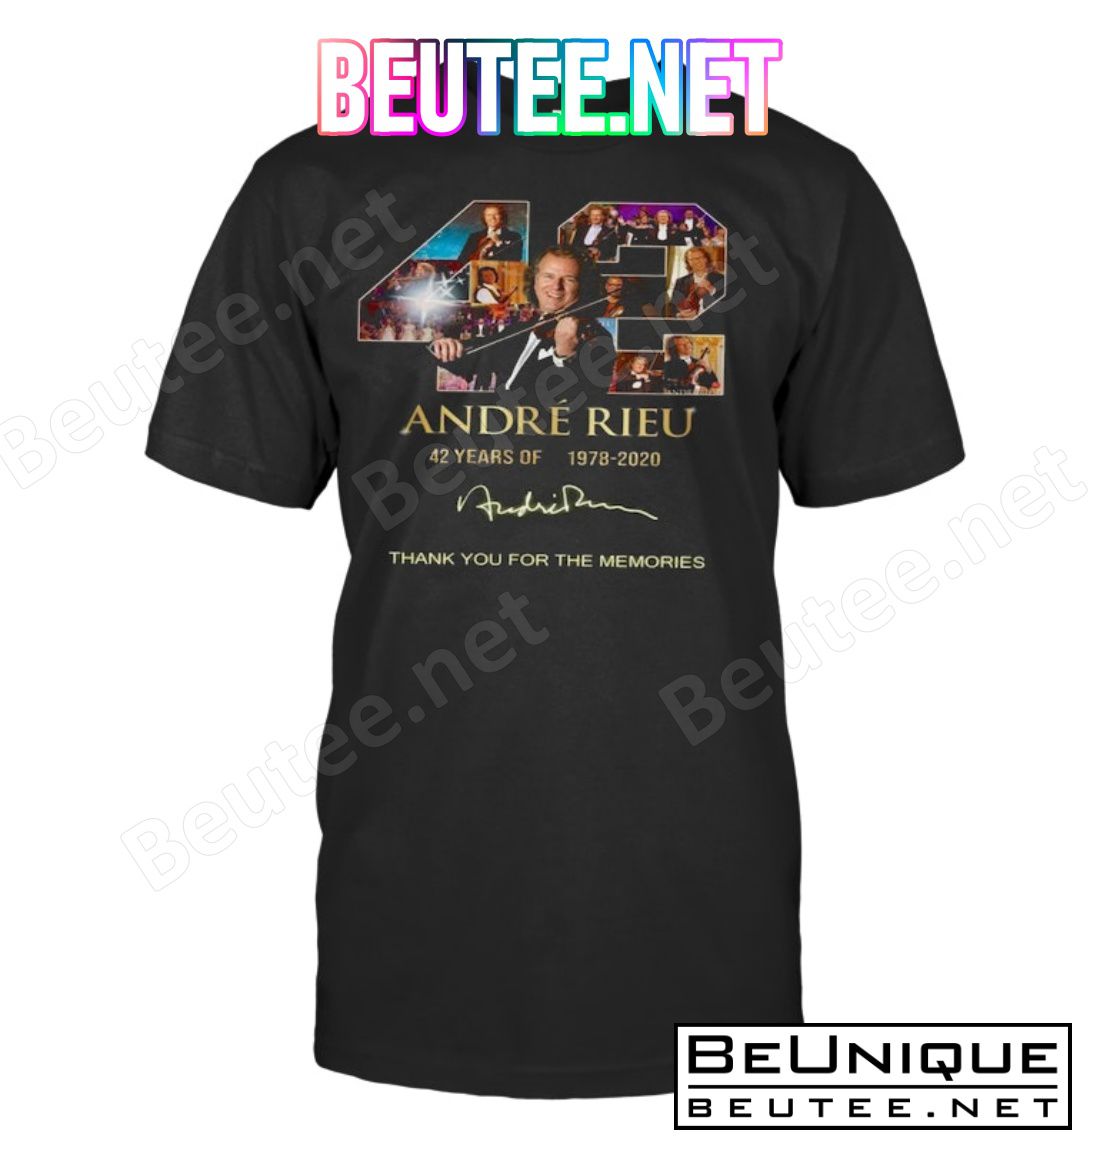 André Rieu 42 Years Of 1978-2020 Signature Thank You For The Memories Shirt